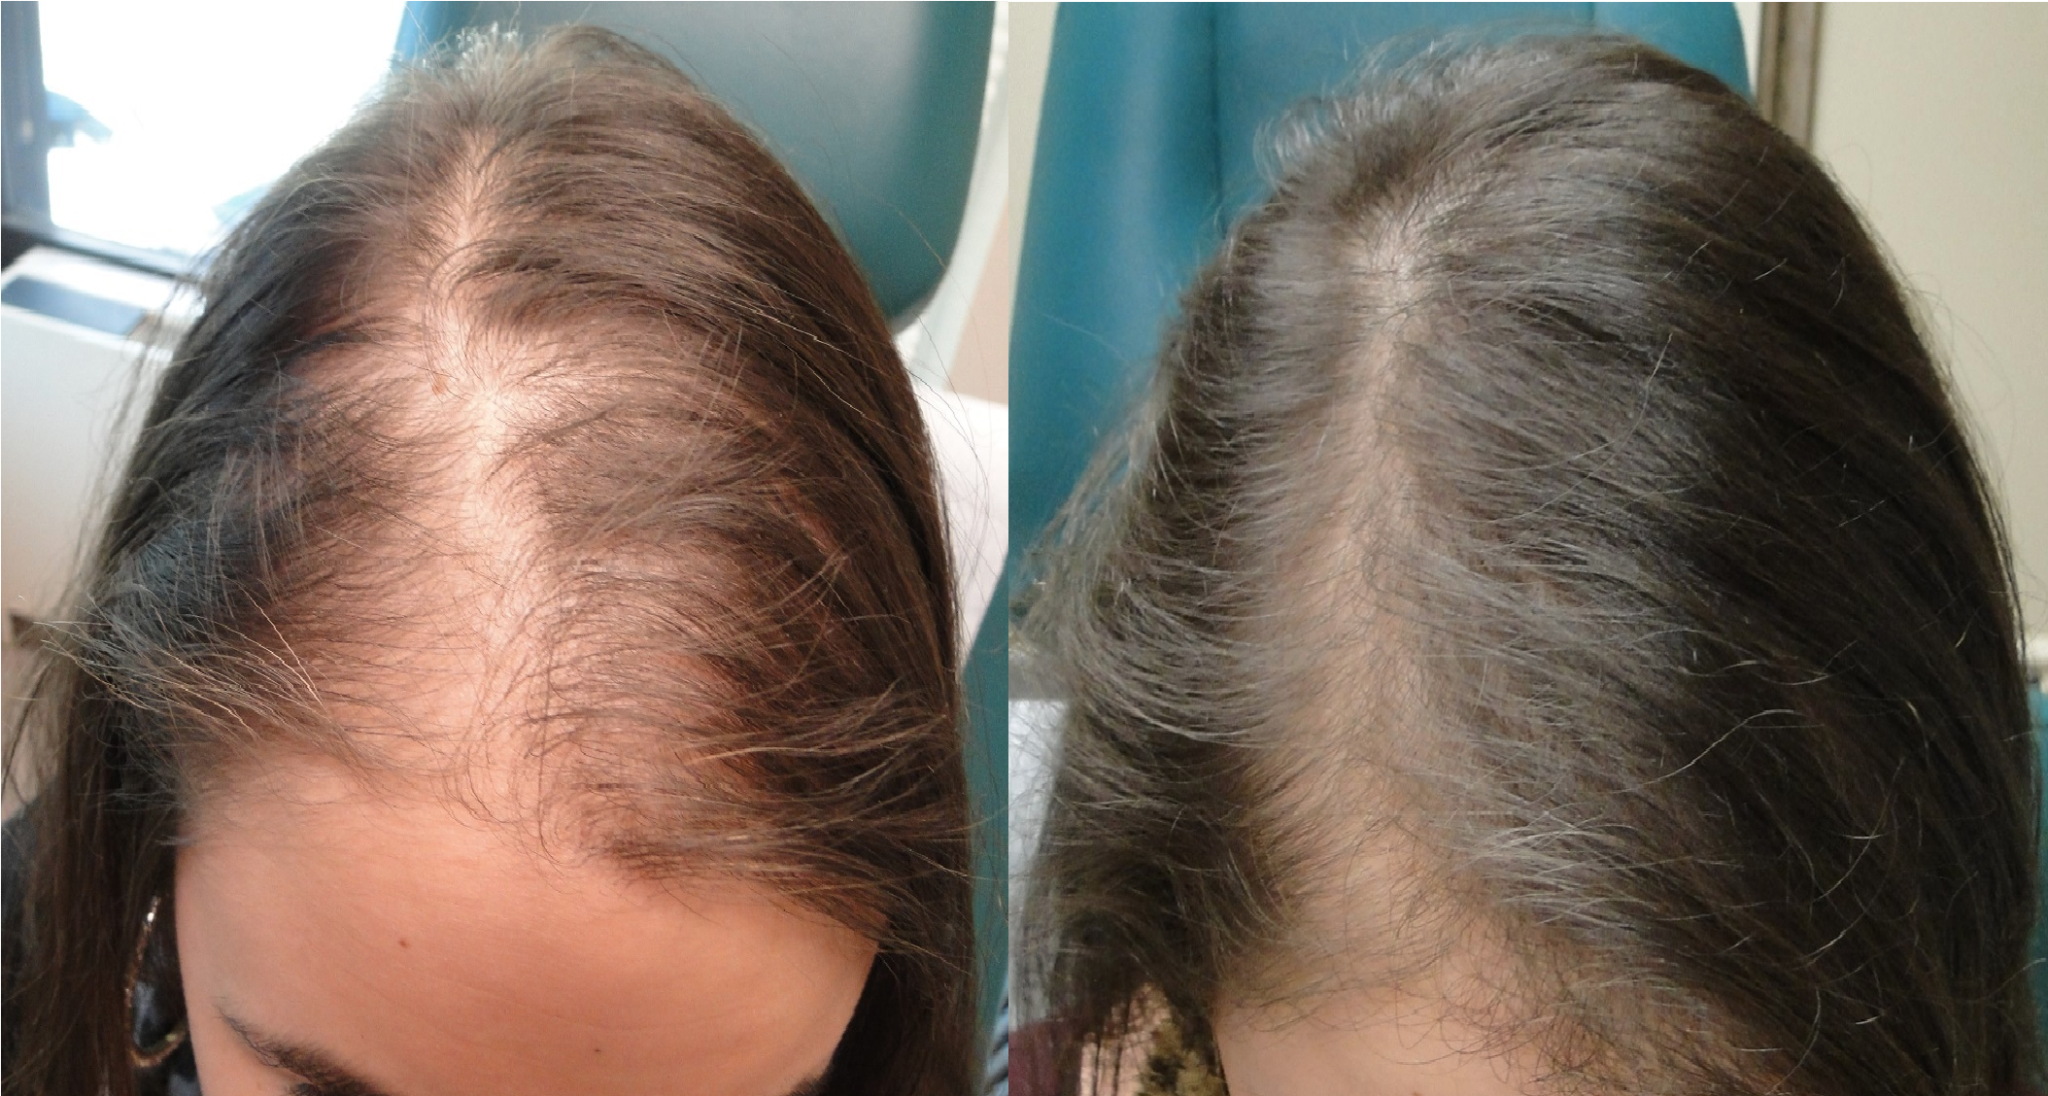 Goals Healthcare - Best NYC Hair Loss Treatment - Dr. Shanna Levine MD